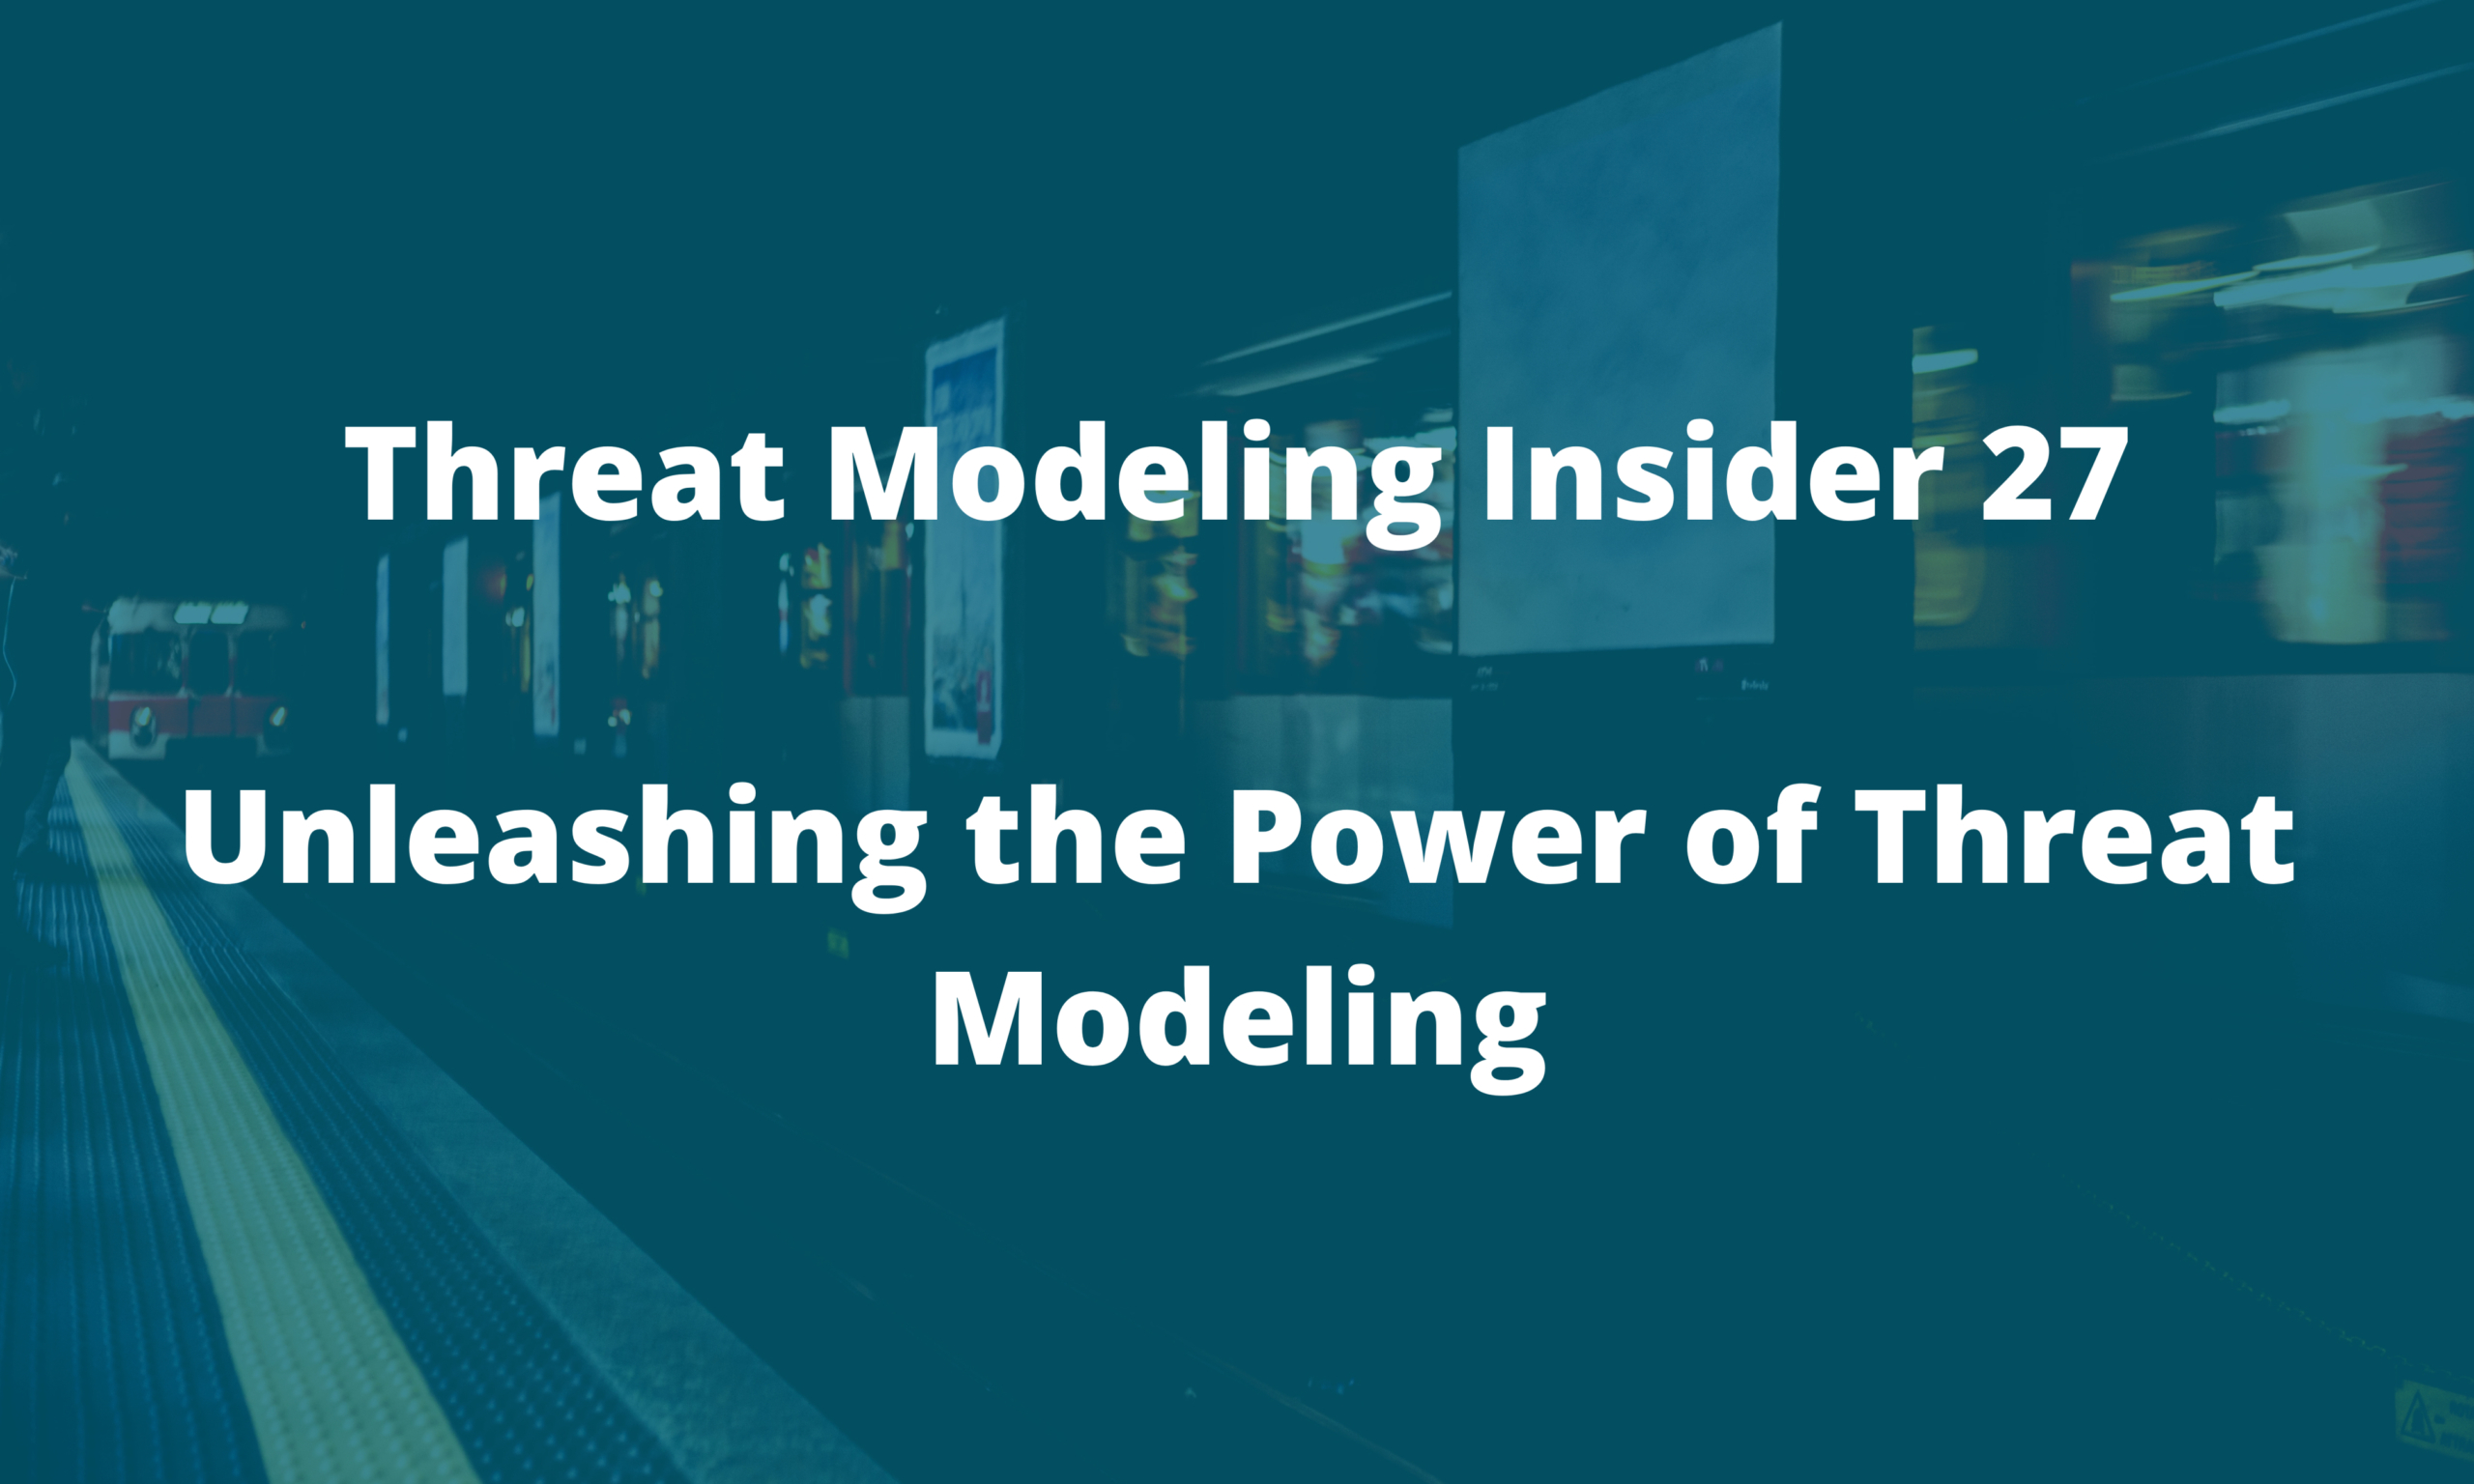 TMI newsletter 27 – Unleashing the Power of Threat Modeling